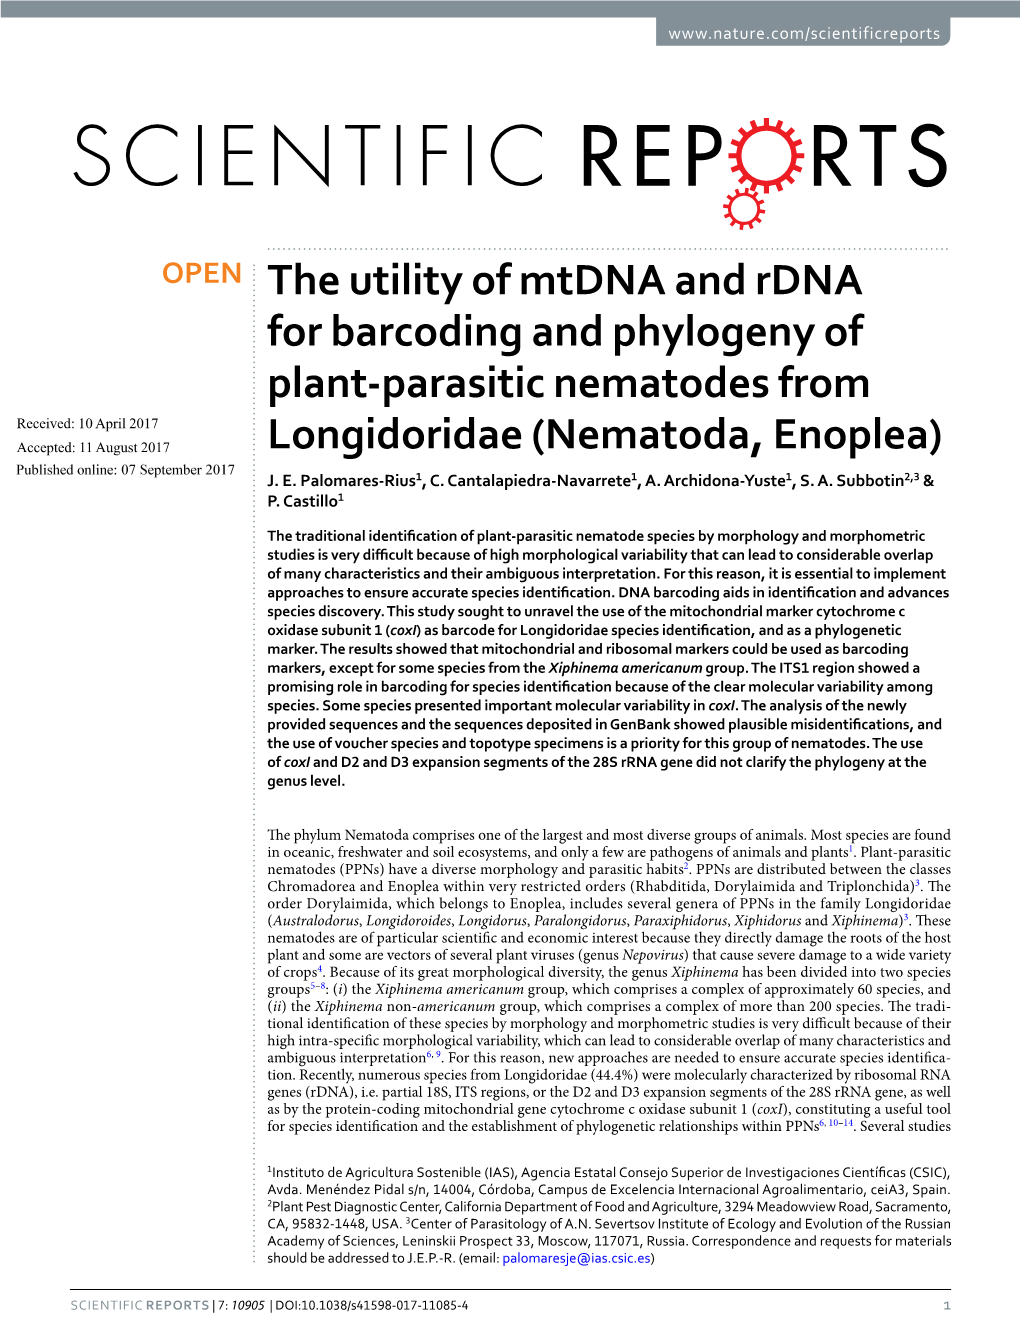 The Utility of Mtdna and Rdna For